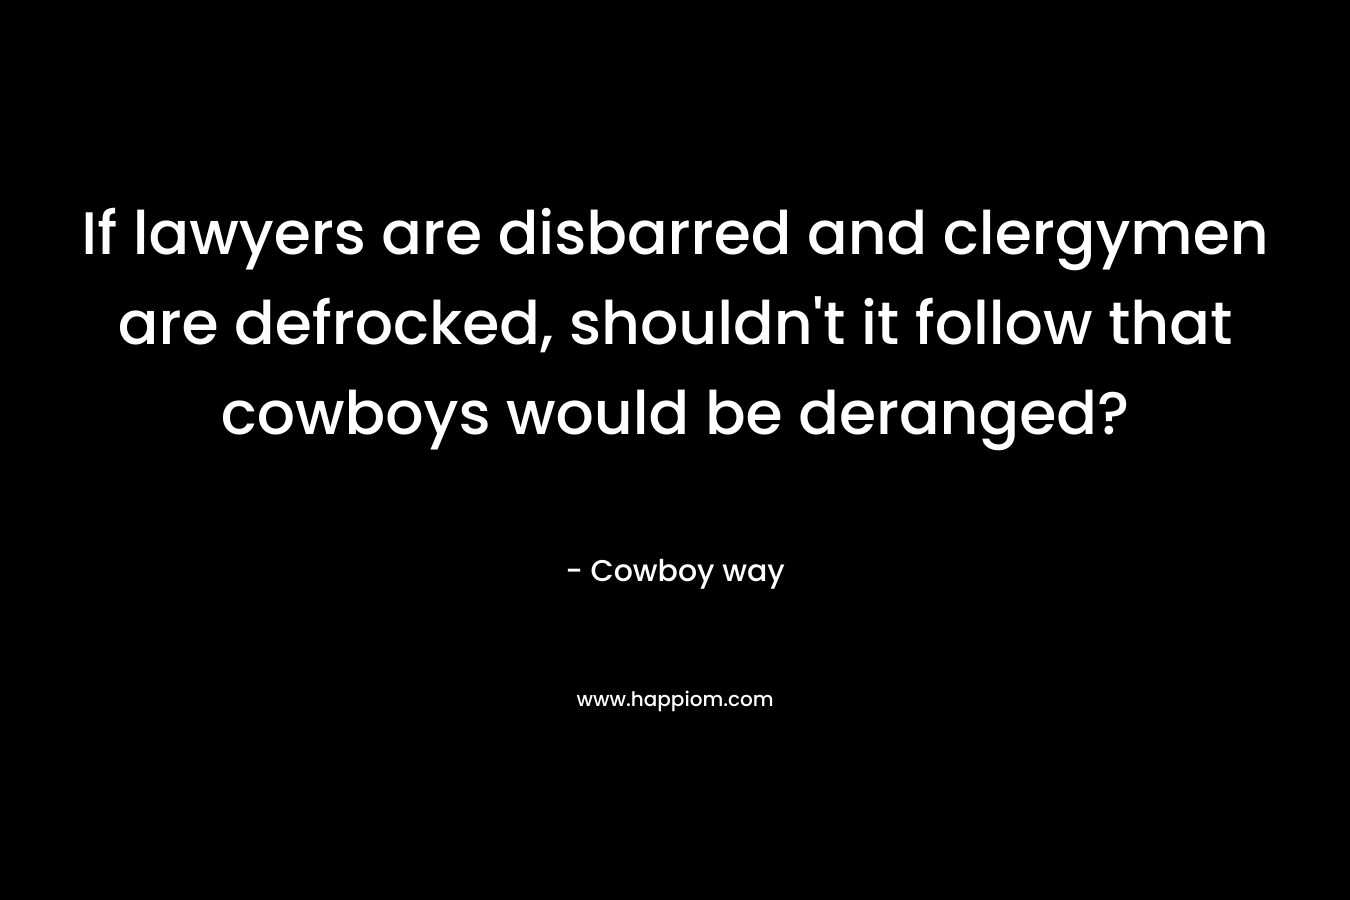 If lawyers are disbarred and clergymen are defrocked, shouldn’t it follow that cowboys would be deranged? – Cowboy way